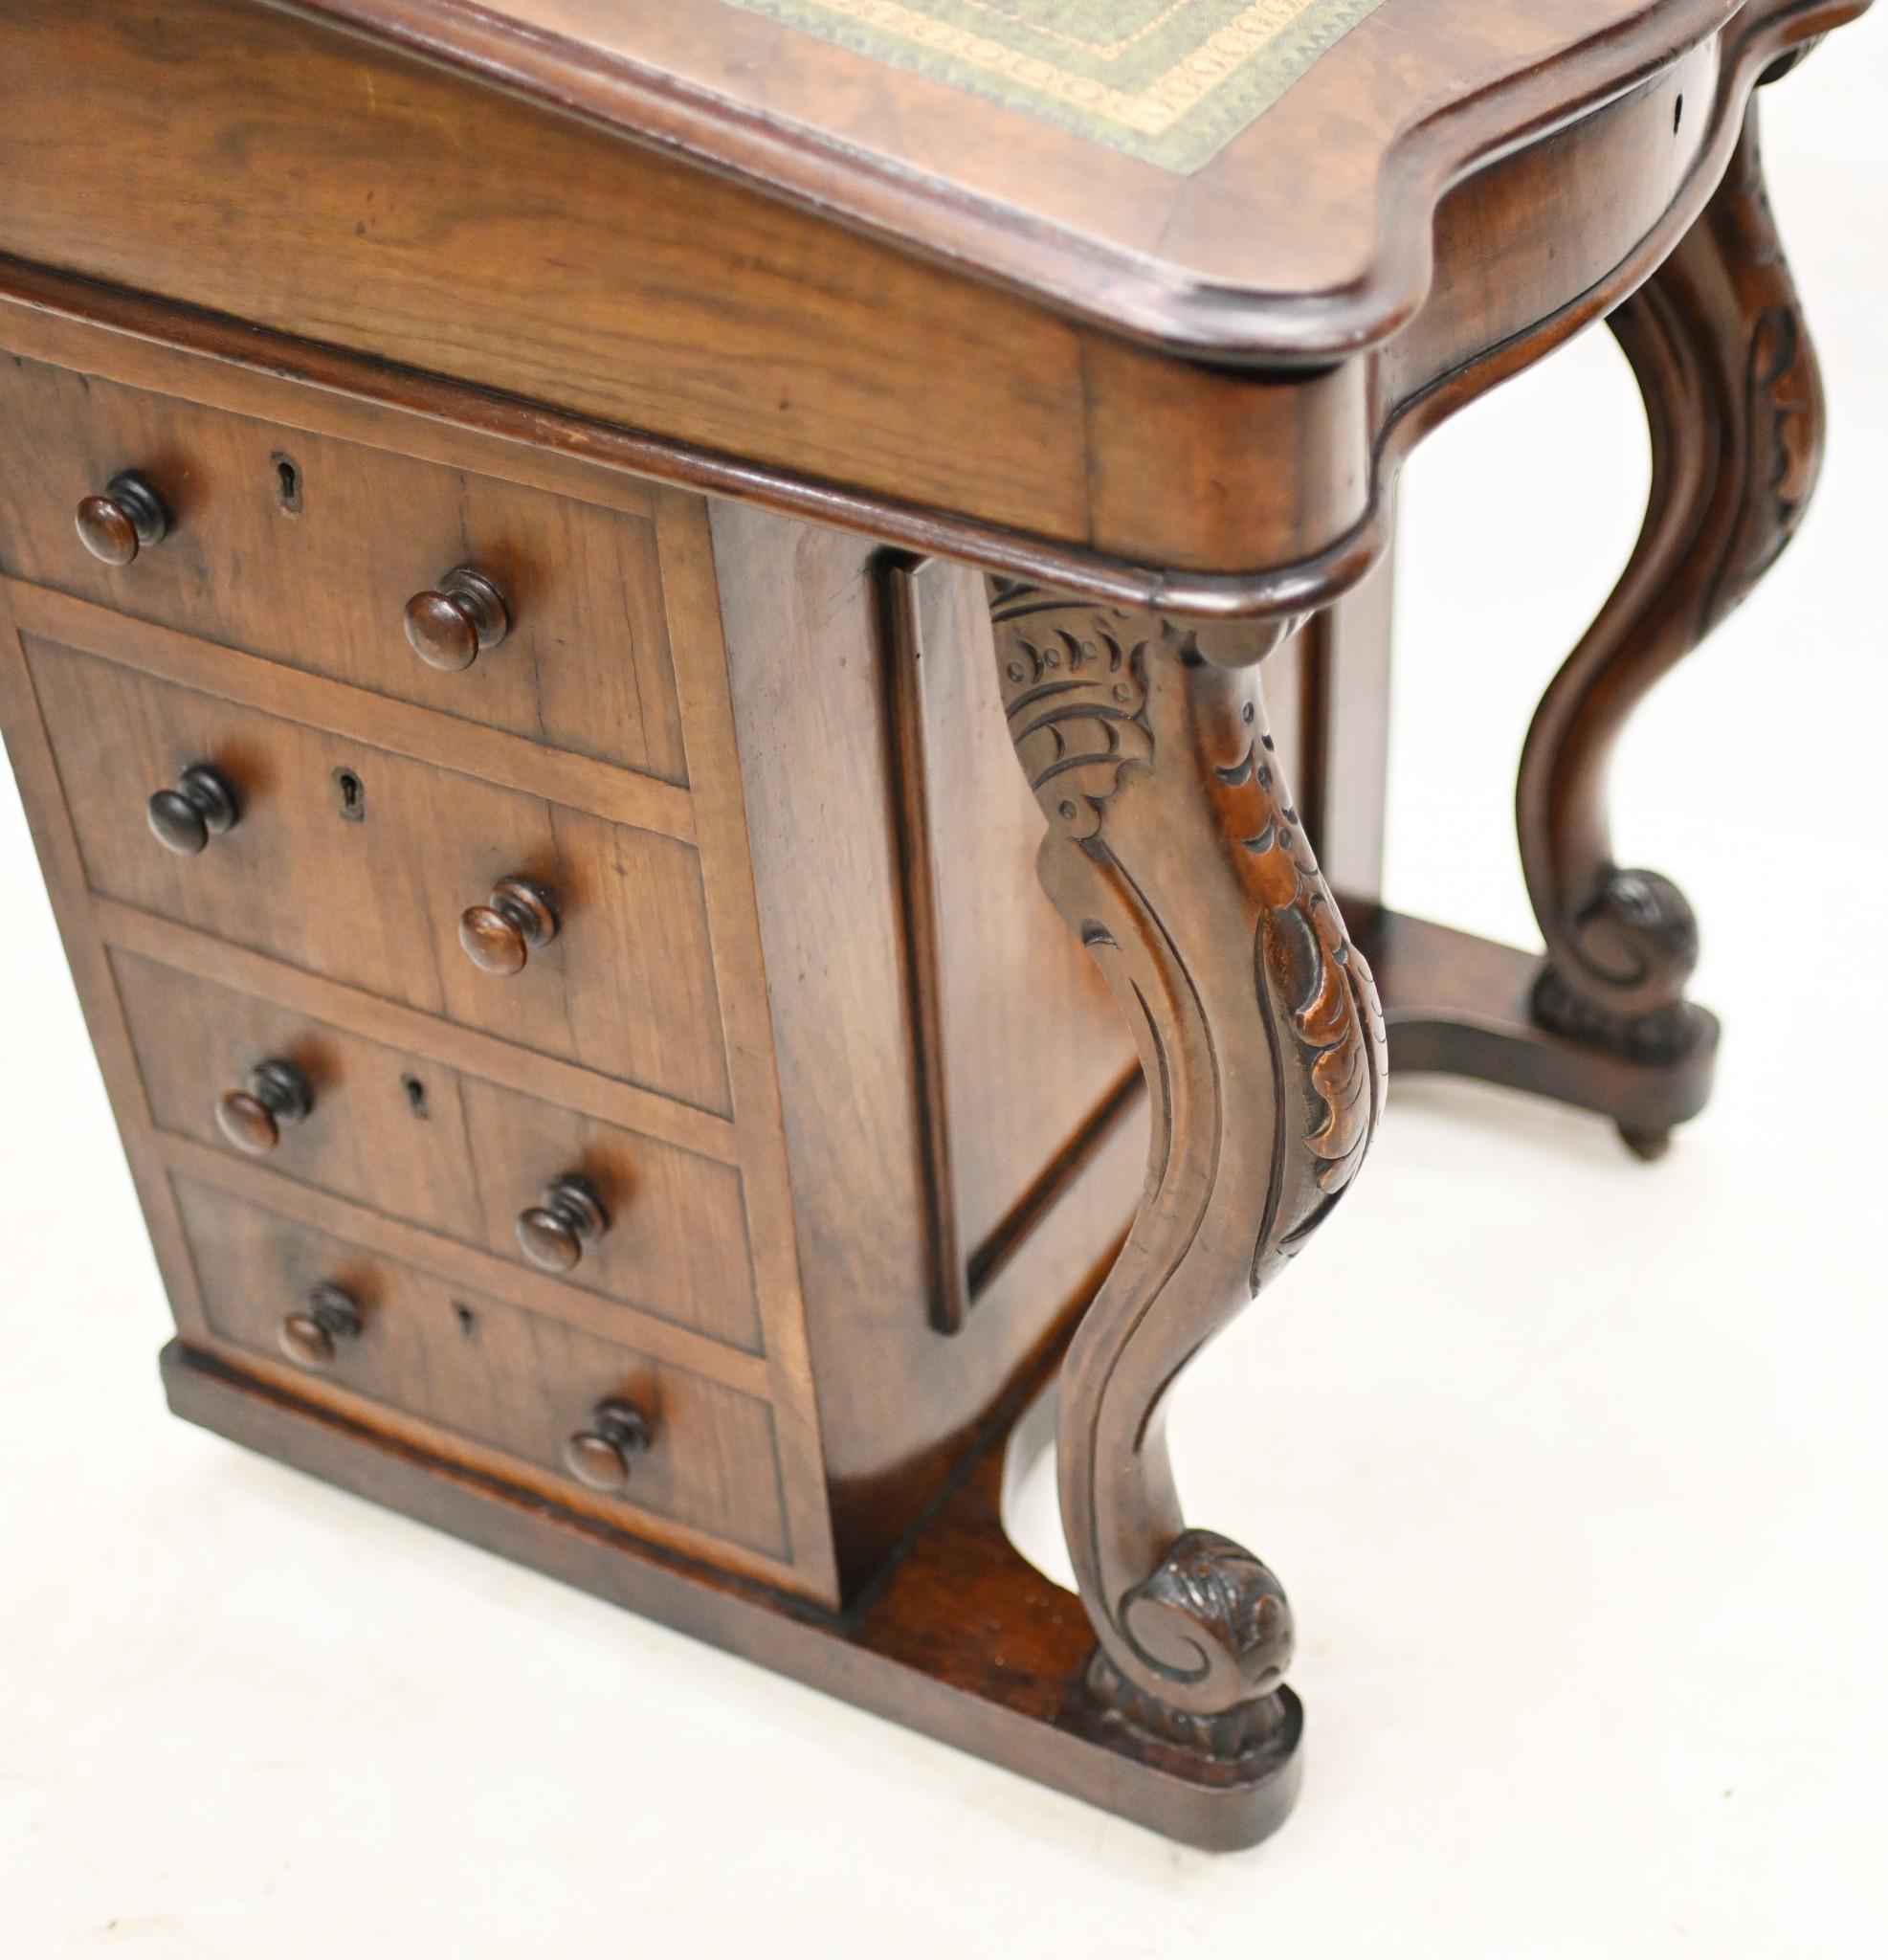 Gorgeous Victorian Davenport desk in walnut
Hand crafted from walnut and circa 1890
Sloped writing surface which opens up to reveal storage space
One side of desk features four drawers
The Davenport desk, popularized in the 19th century, is a